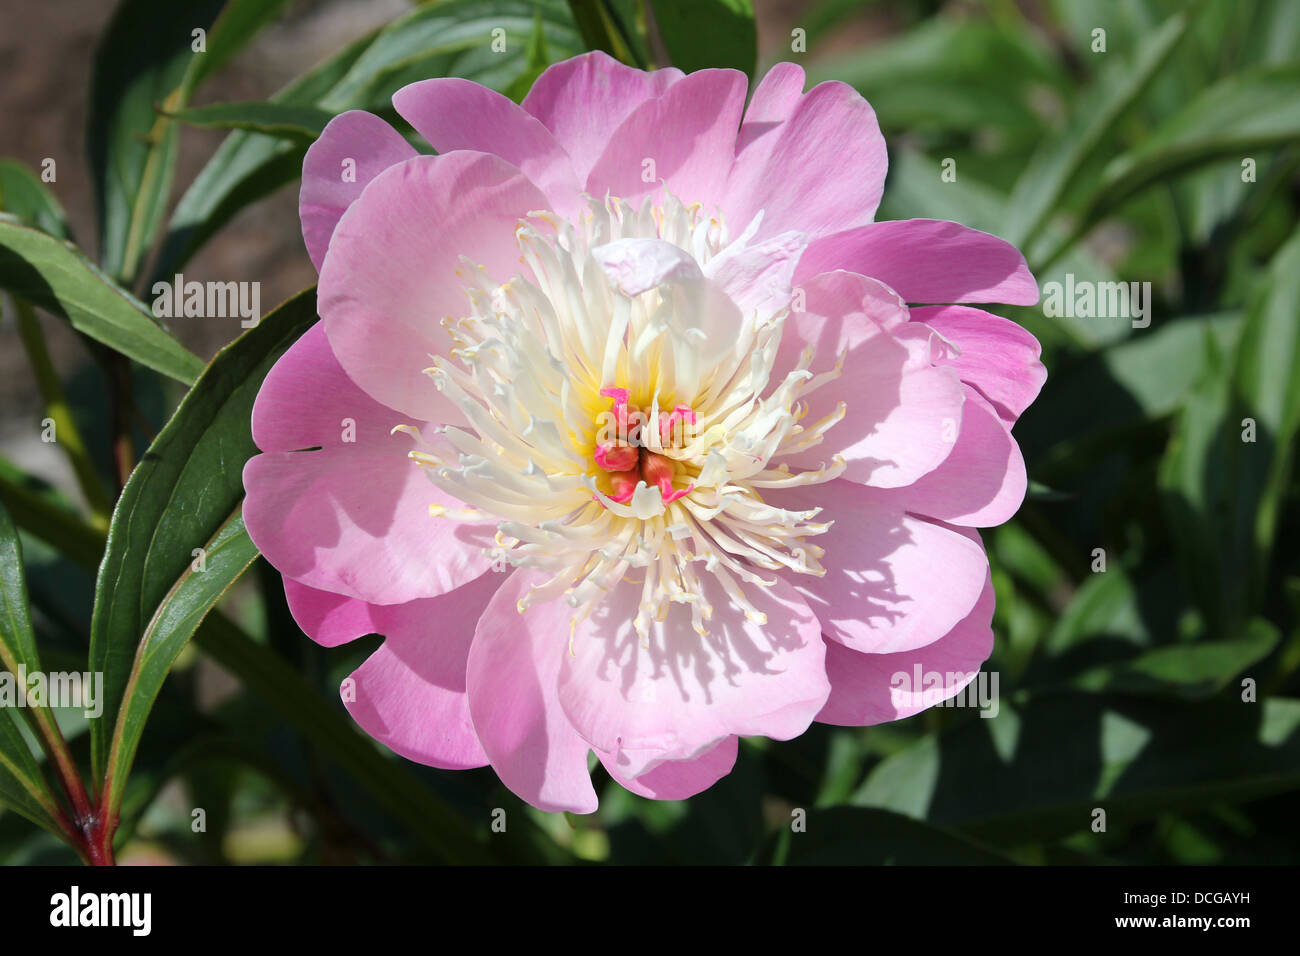 A Delicate Pink Peony 'Bowl of Beauty' Stock Photo